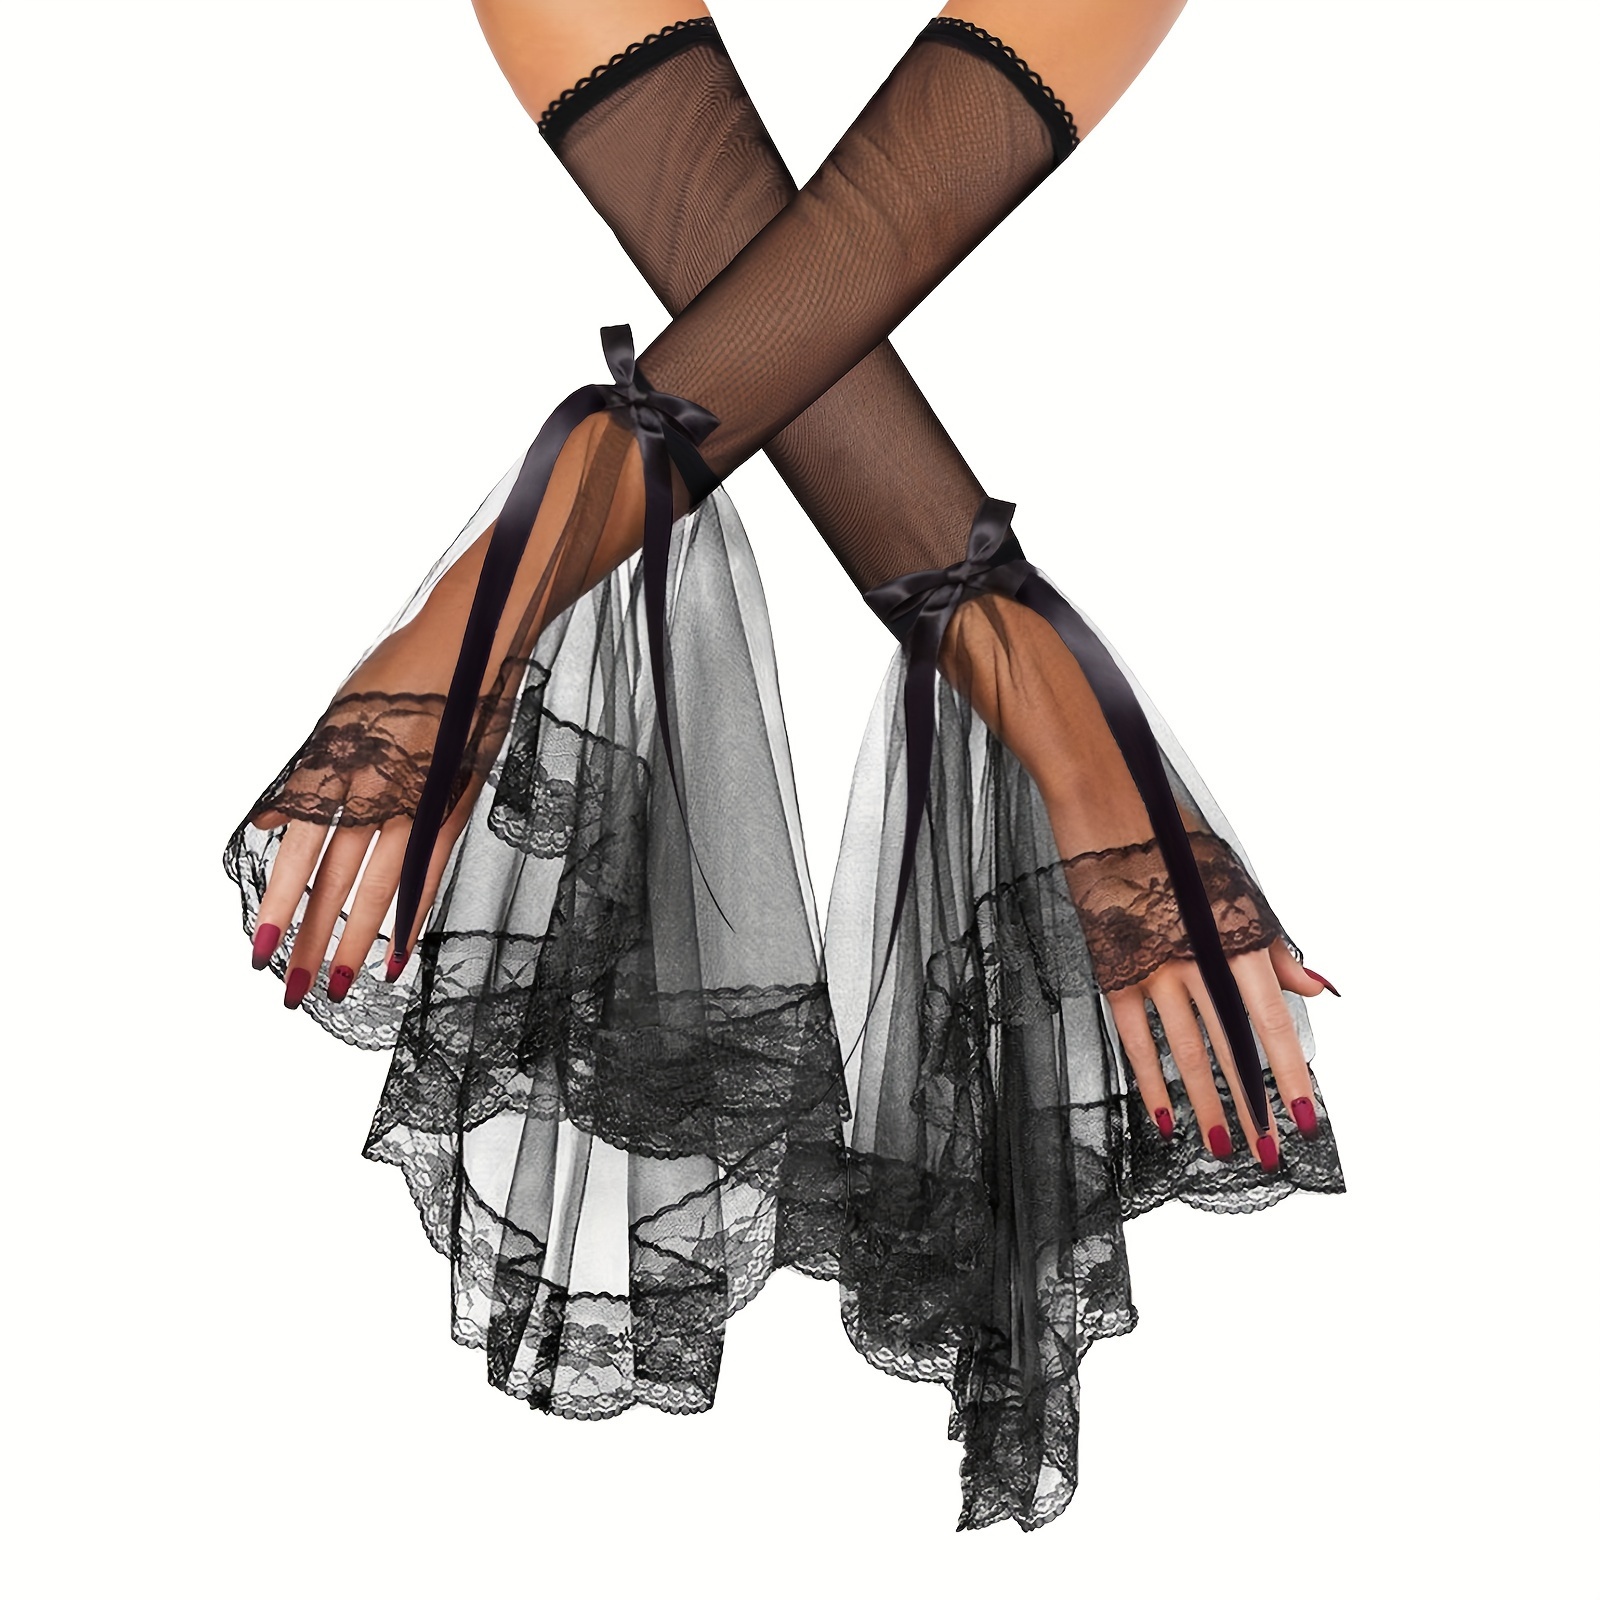 

Women's Gothic 1 Pair Black Grim Detachable Arm Sleeves Costume Long Lace Cuff Halloween Witch Accessory